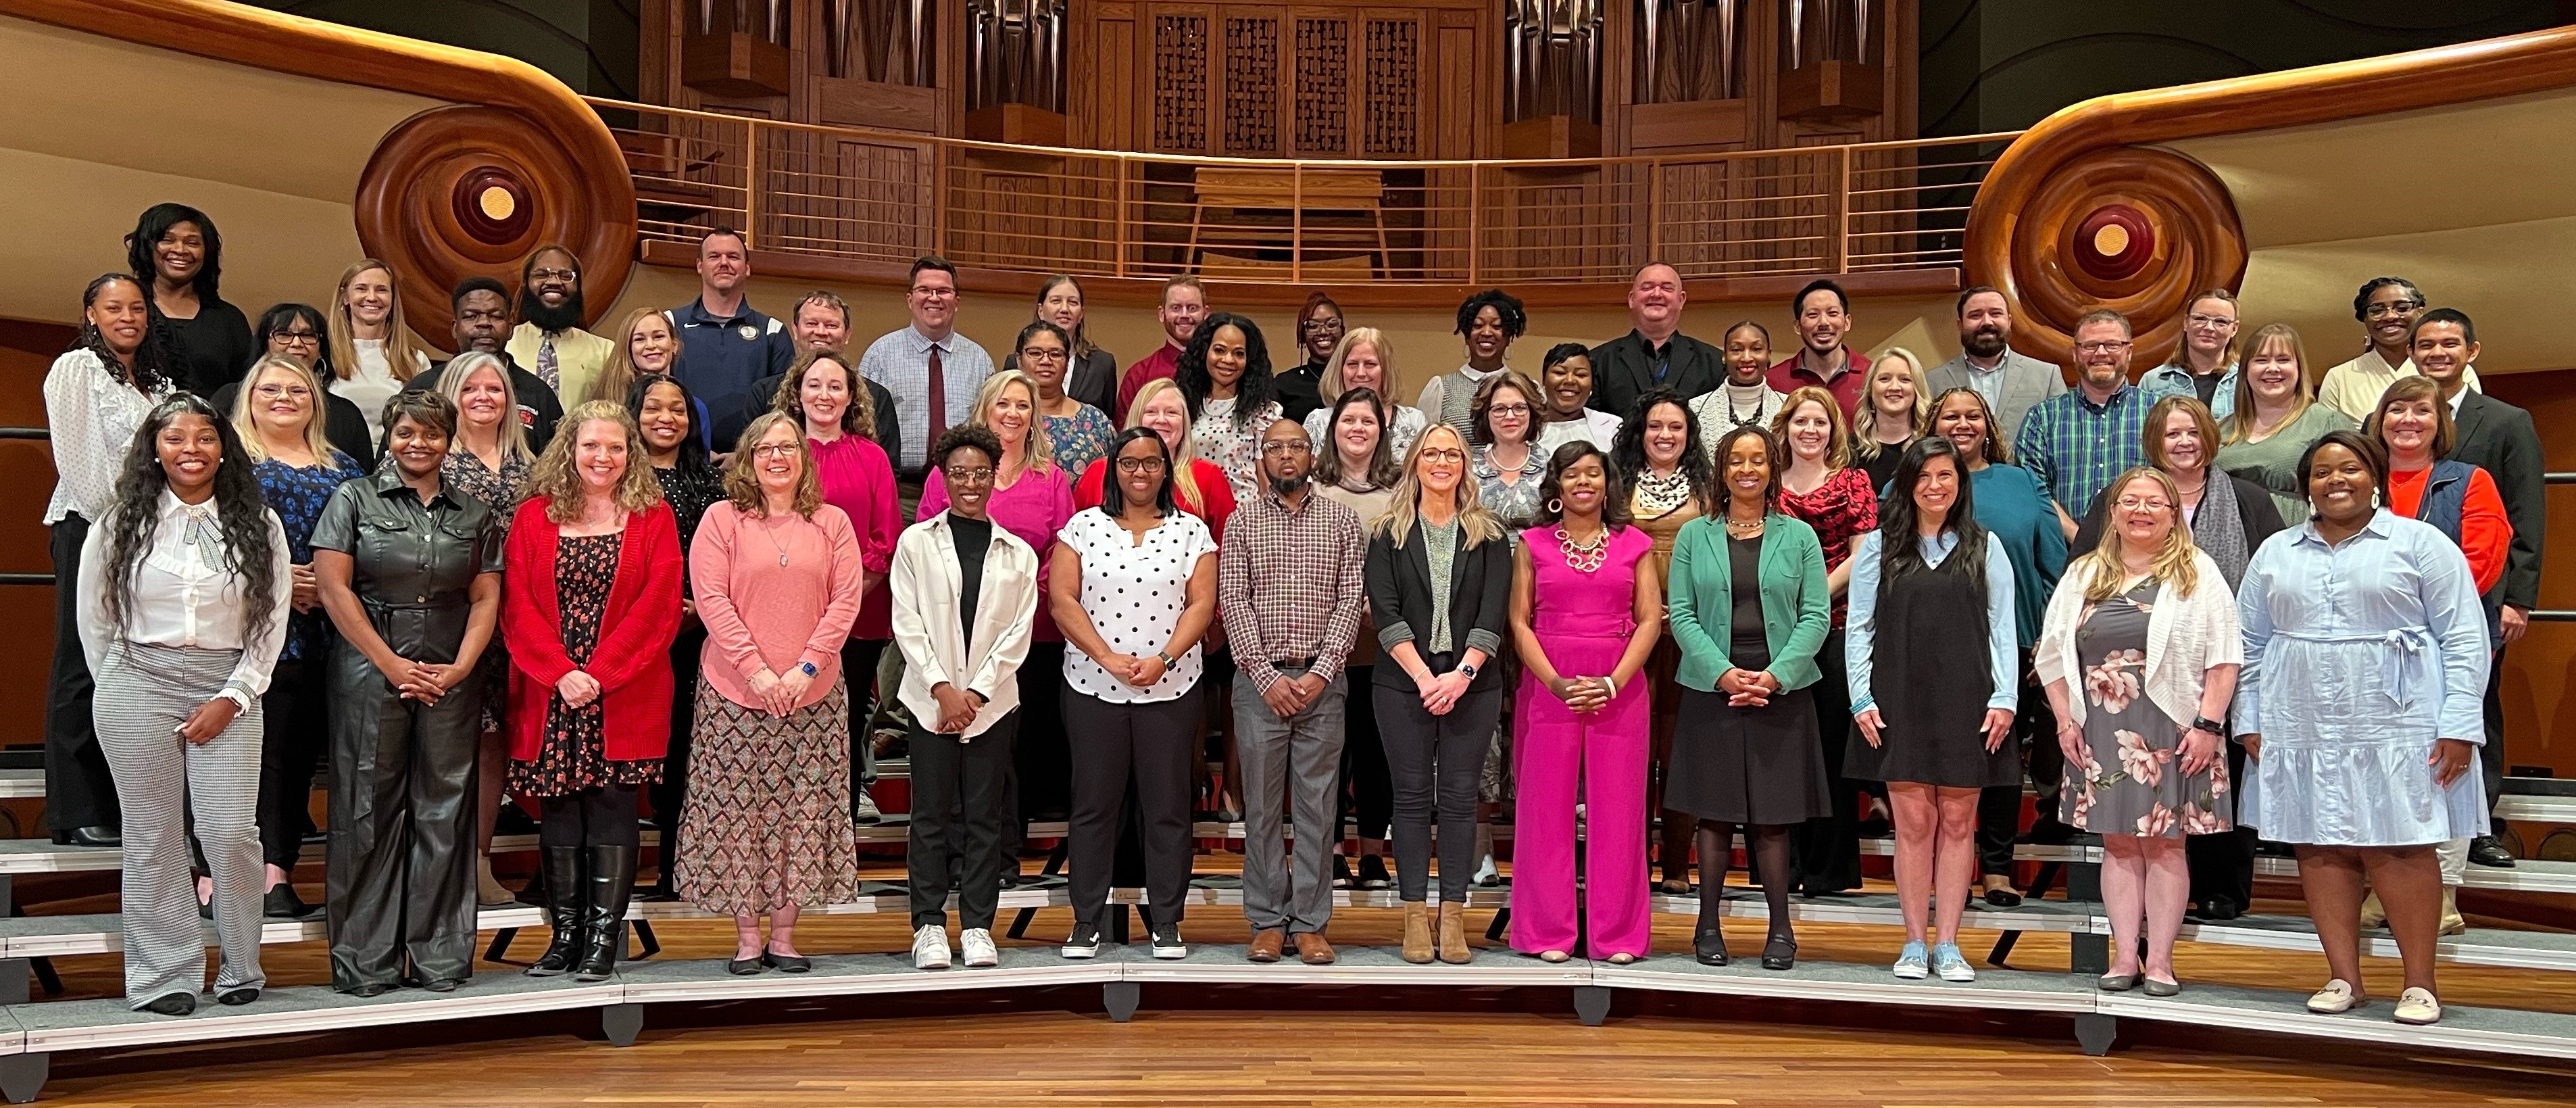 Group photo of the Muscogee County School District's school-level teachers of the year standing on risers in Legacy Hall